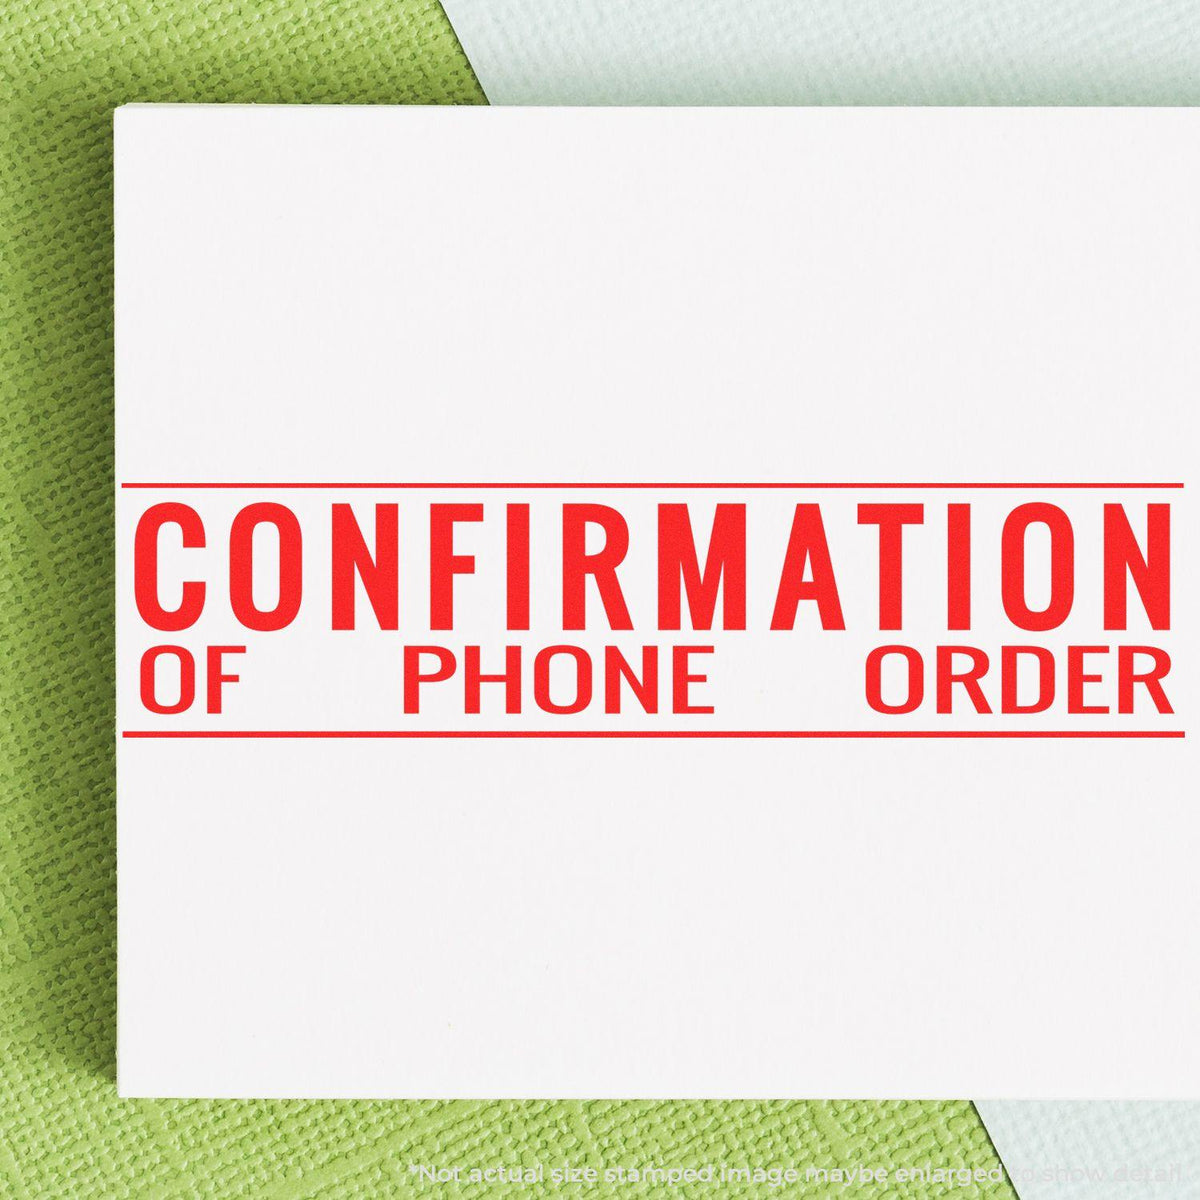 In Use Large Confirmation of Phone Order Rubber Stamp Image